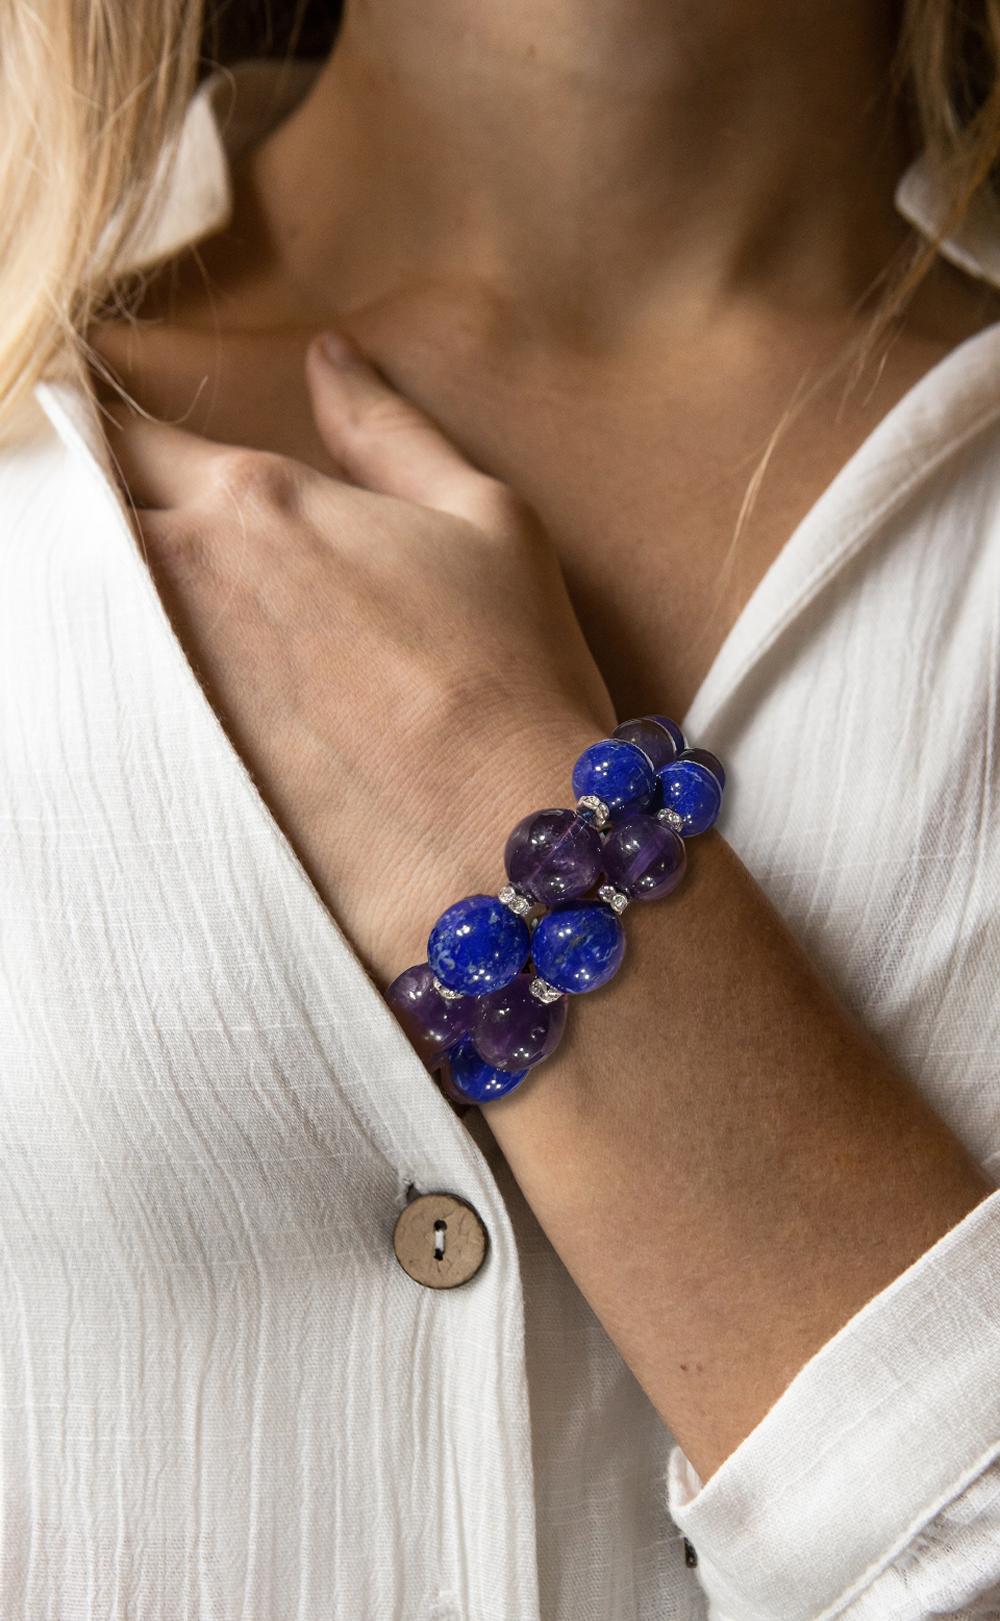 Genuine Lapis Lazuli and Amethyst Diamanté Sterling Bead Adjustable Bracelet

Unusual real blue lapis-lazuli and purple amethyst 16mm beads interspersed with crystal set rondels attached to an adjustable sterling silver clasp measure a generous